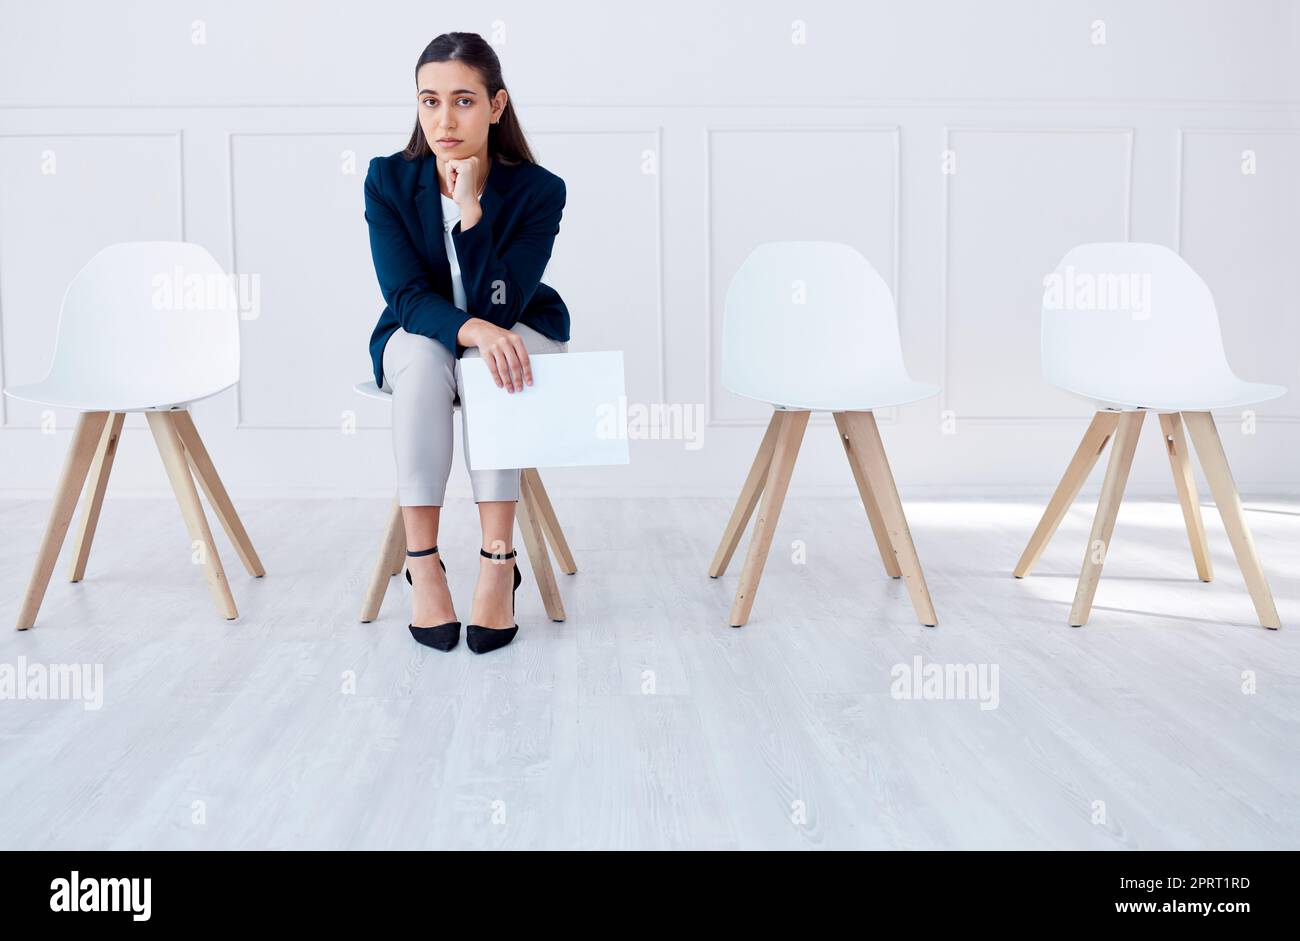 Portrait business woman waiting for an interview or stress applicant sitting alone. Sad or nervous corporate professional holding resume in line for job opening, vacancy and opportunity in office Stock Photo